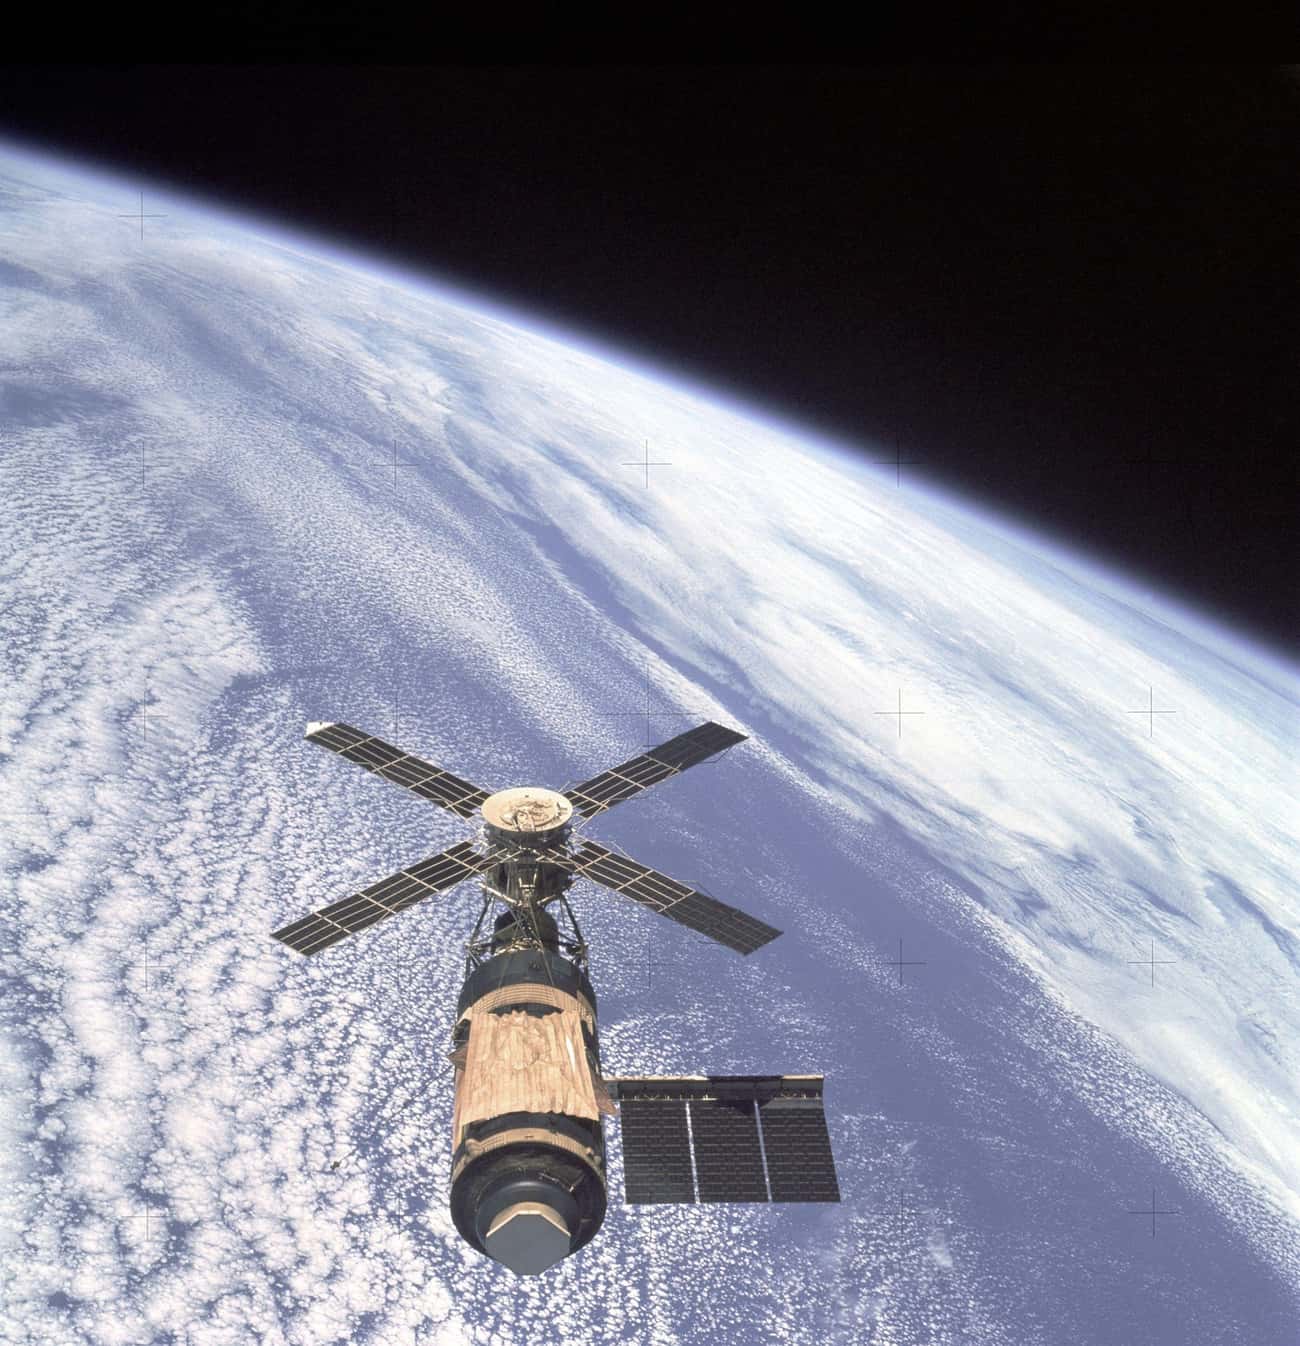 1973 - First American Space Station